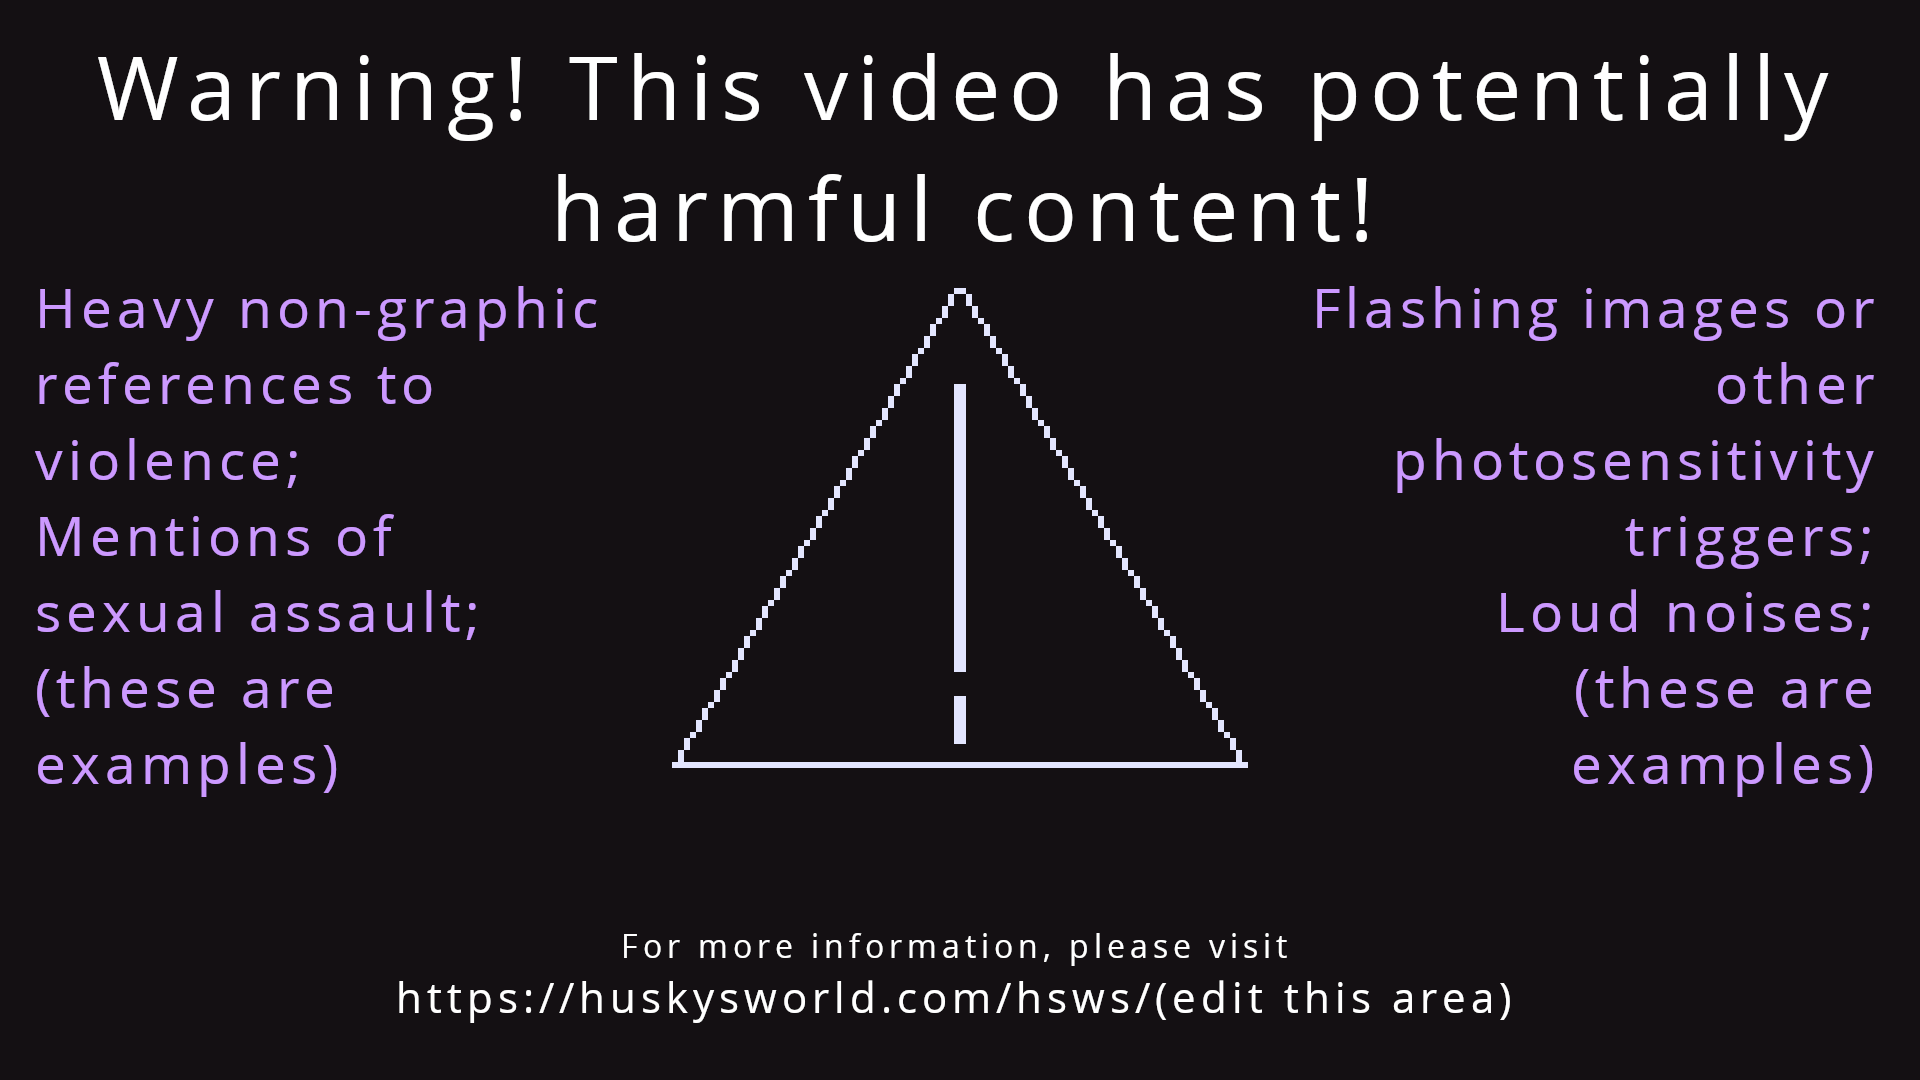 An example HSWS warning image